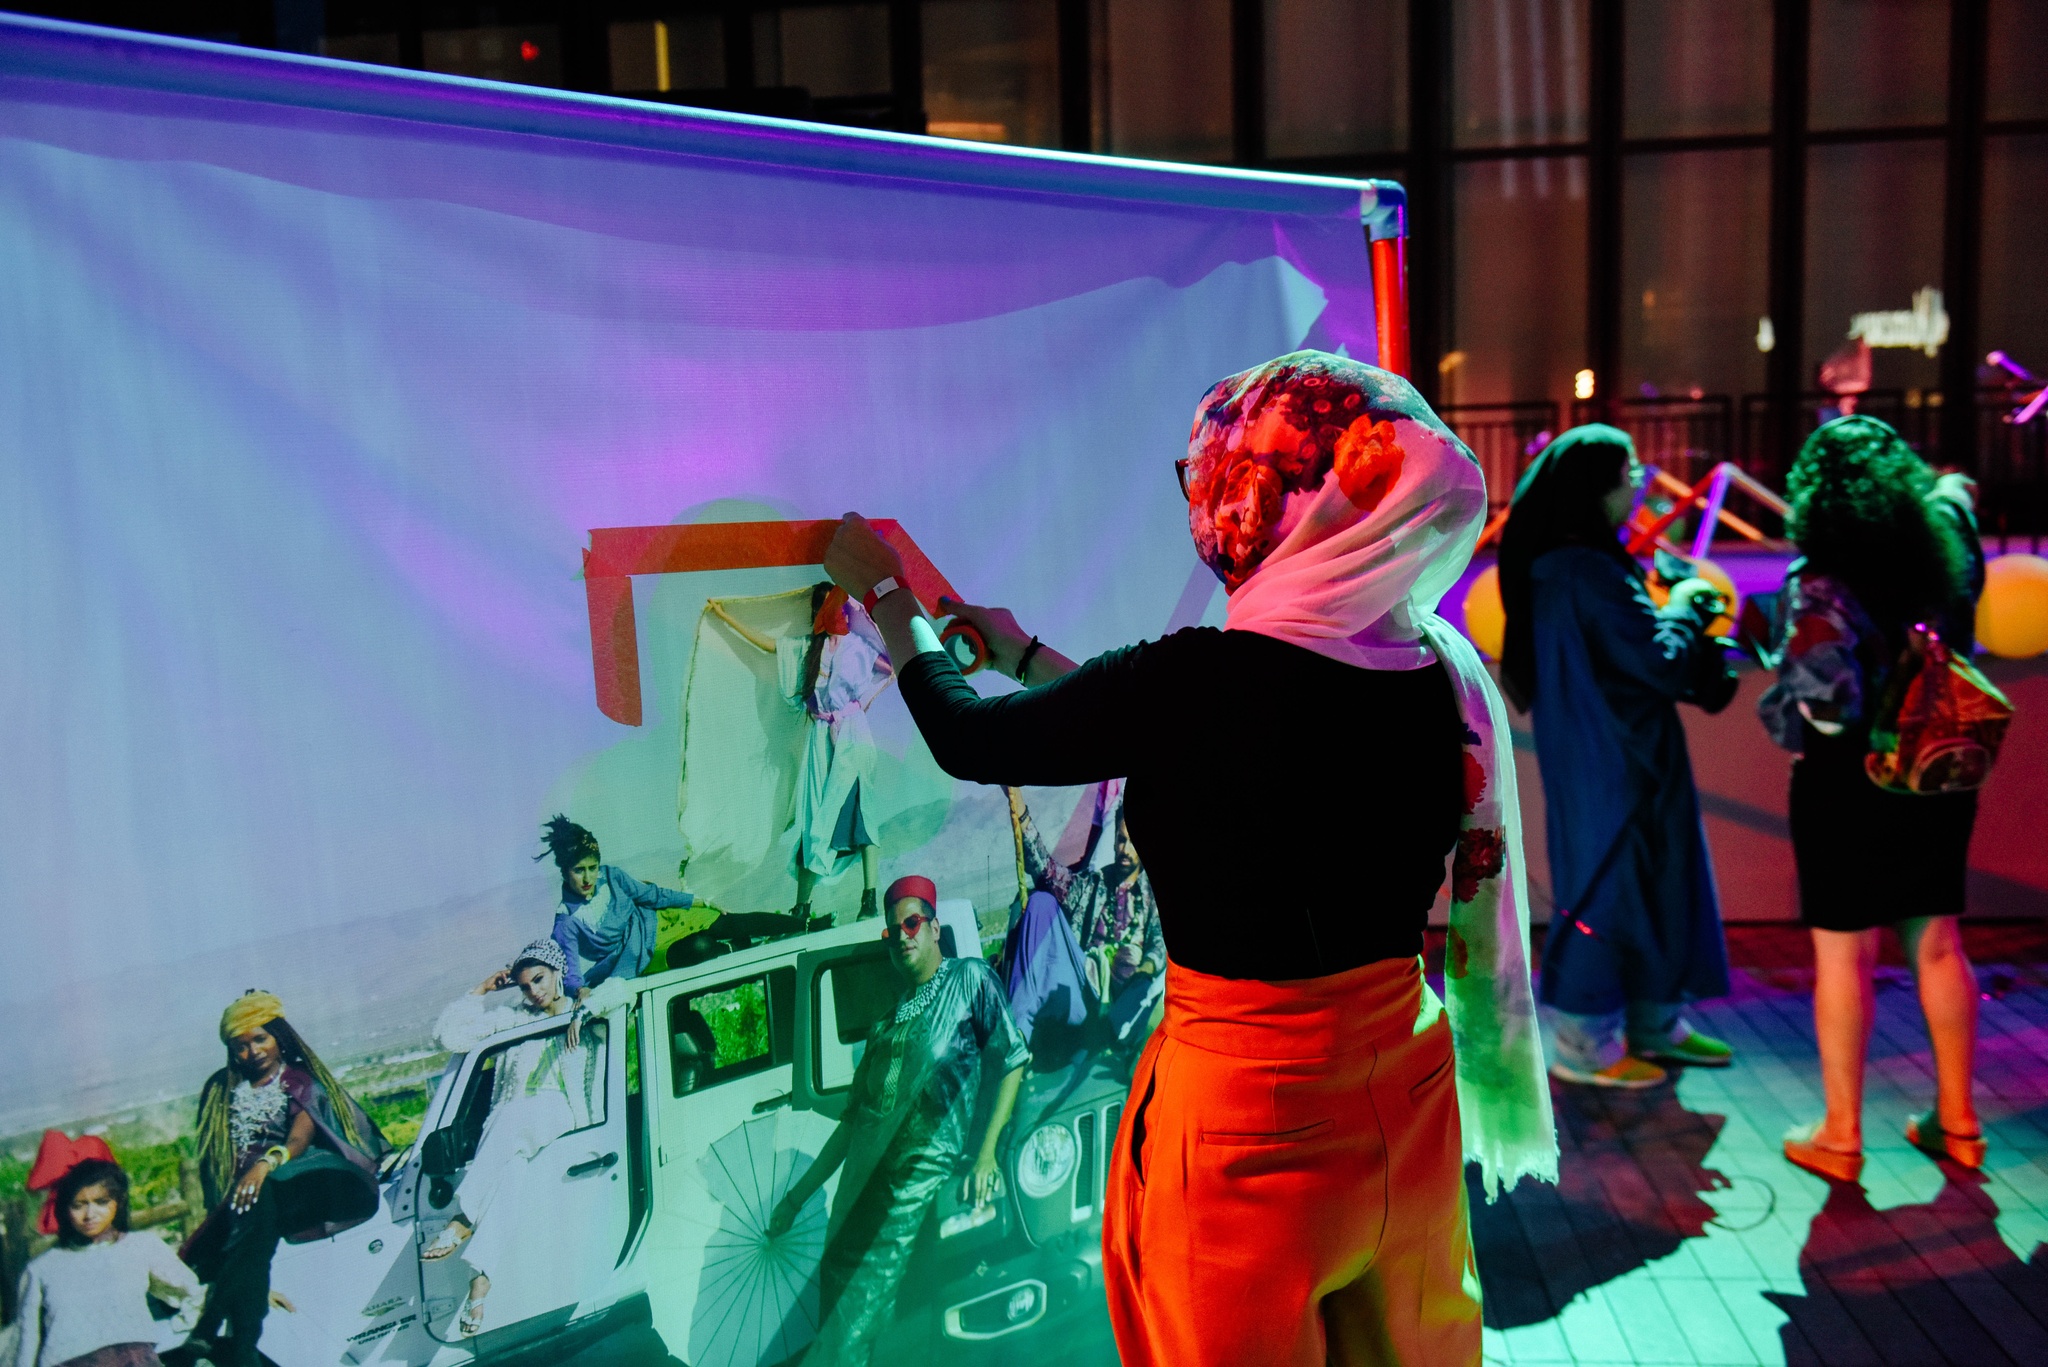 An audience member interacting with an installation artwork by MIPSTERZ.